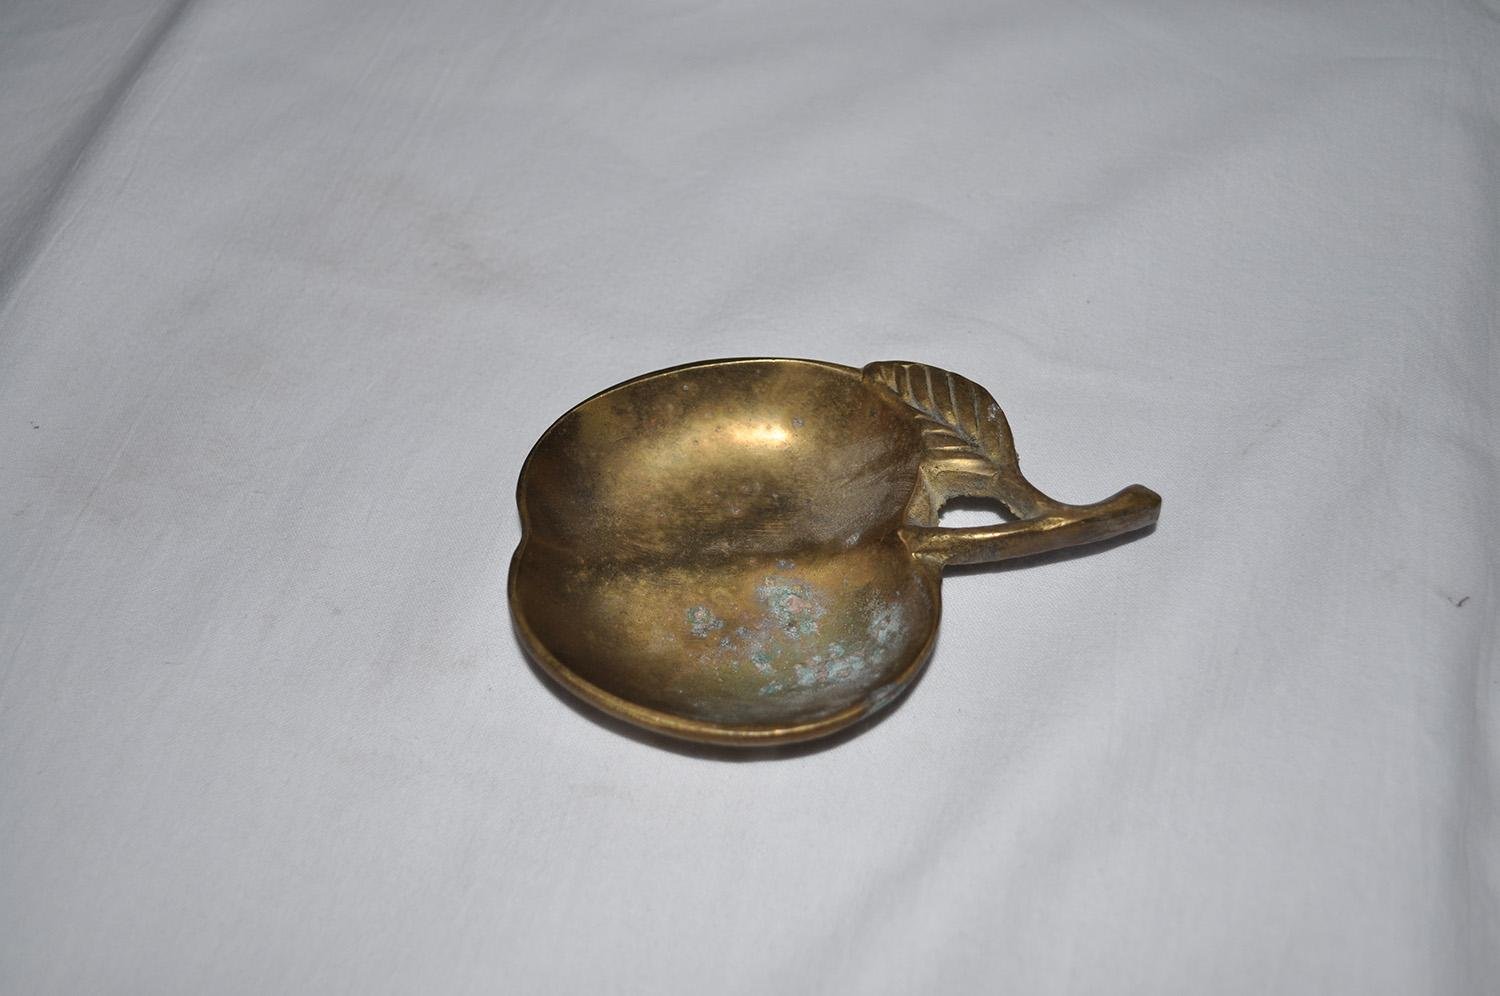 Turkish Brass Apple Ashtray, 1970s for sale at Pamono